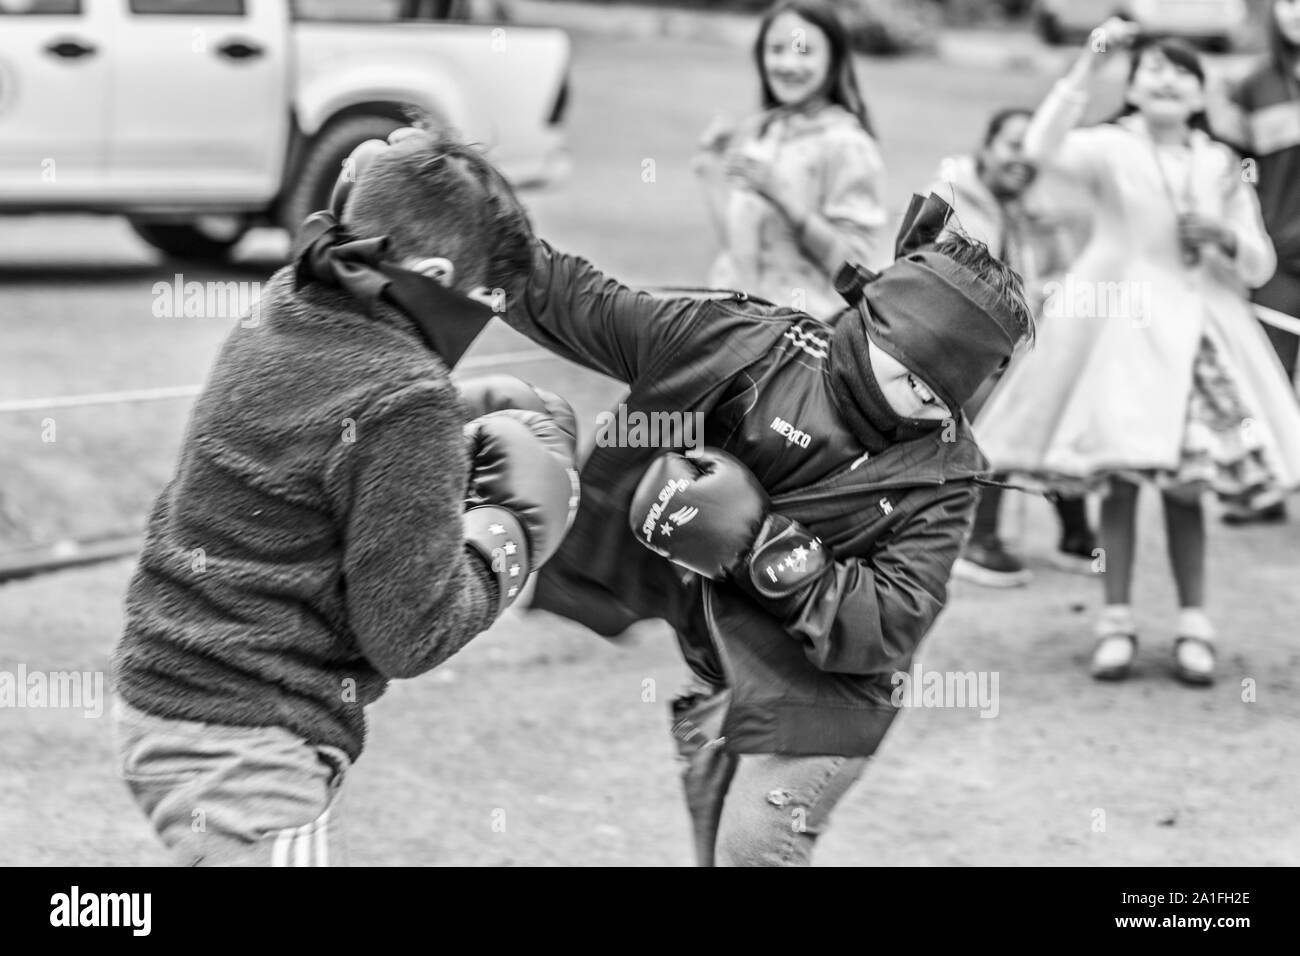 Miners Day celebrations at El Volcan village, Cajon del Maipo valley at the Andes. Blind kids boxing fight, a funny event during the party Stock Photo